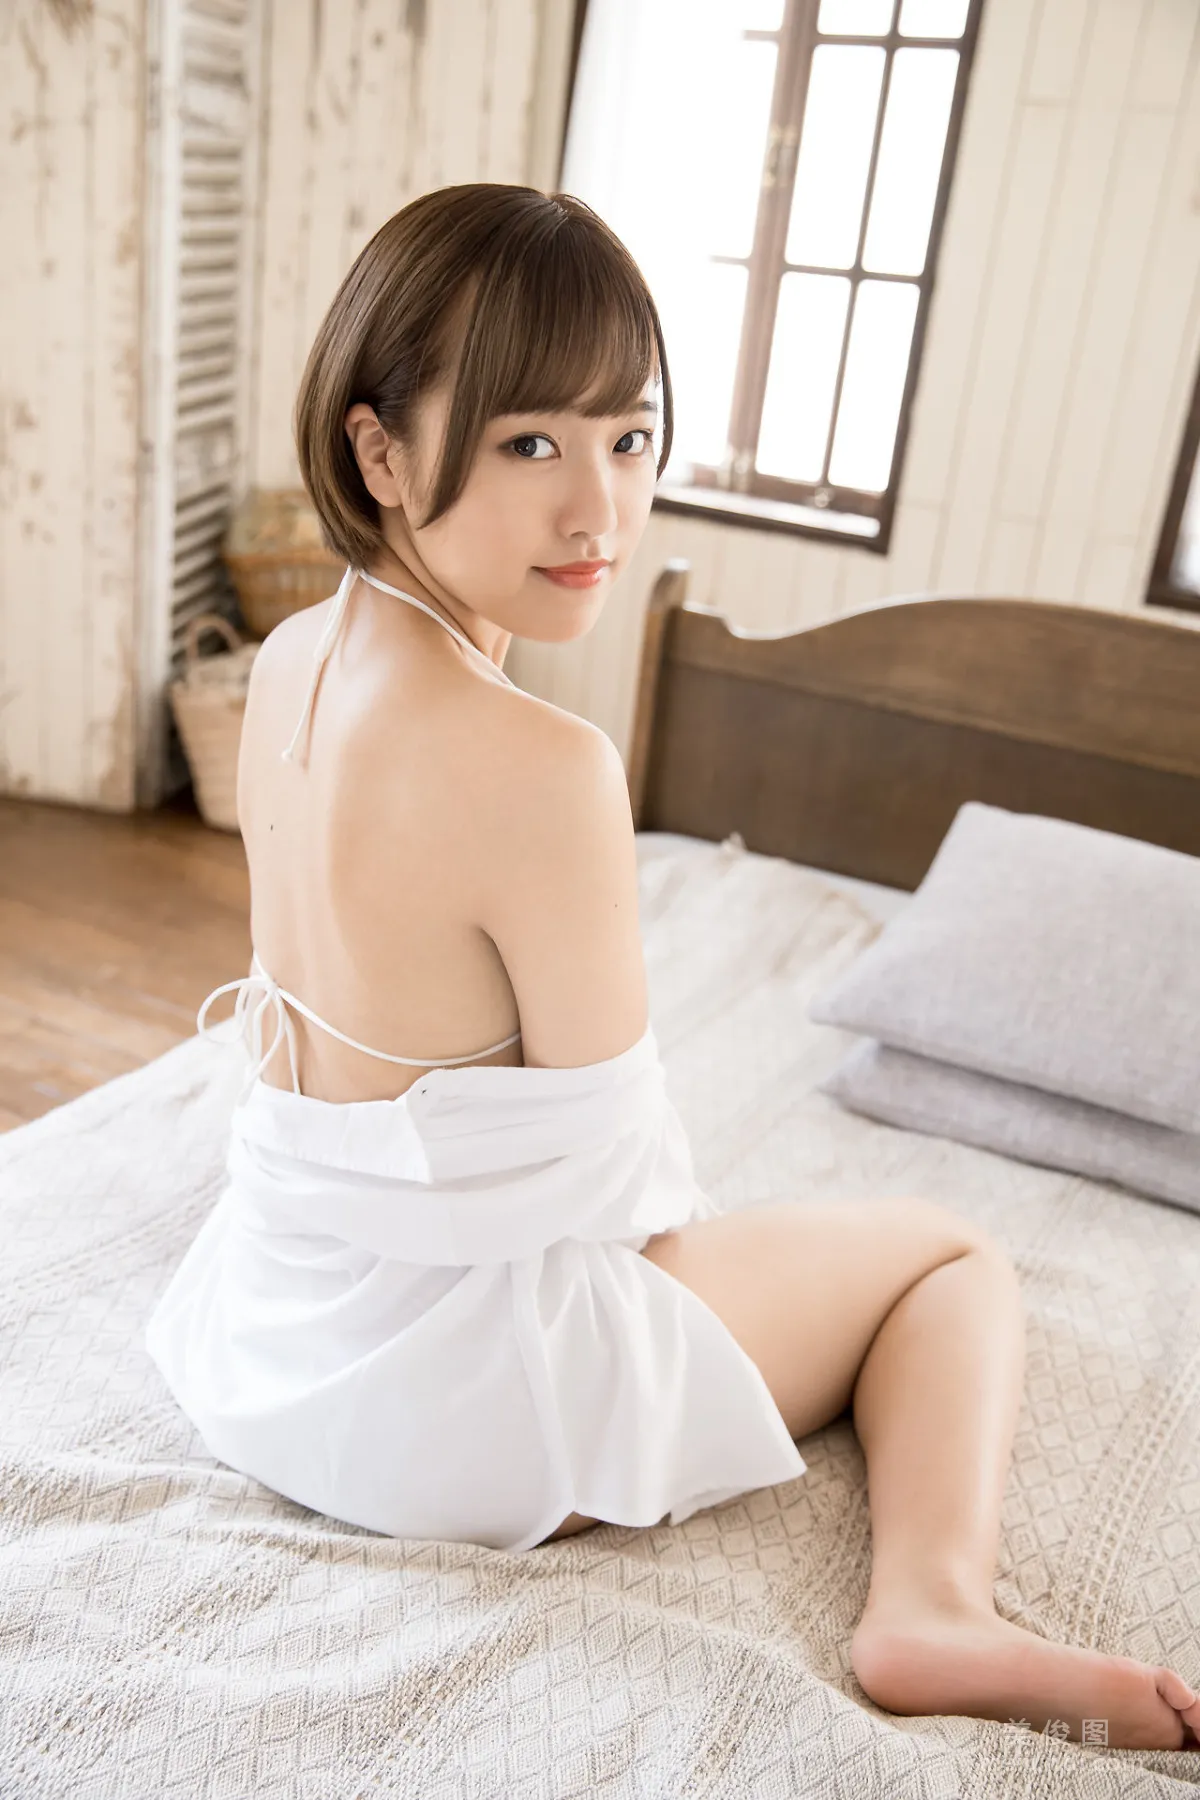 [Minisuka.tv] 香月りお - Special Gallery 13.114